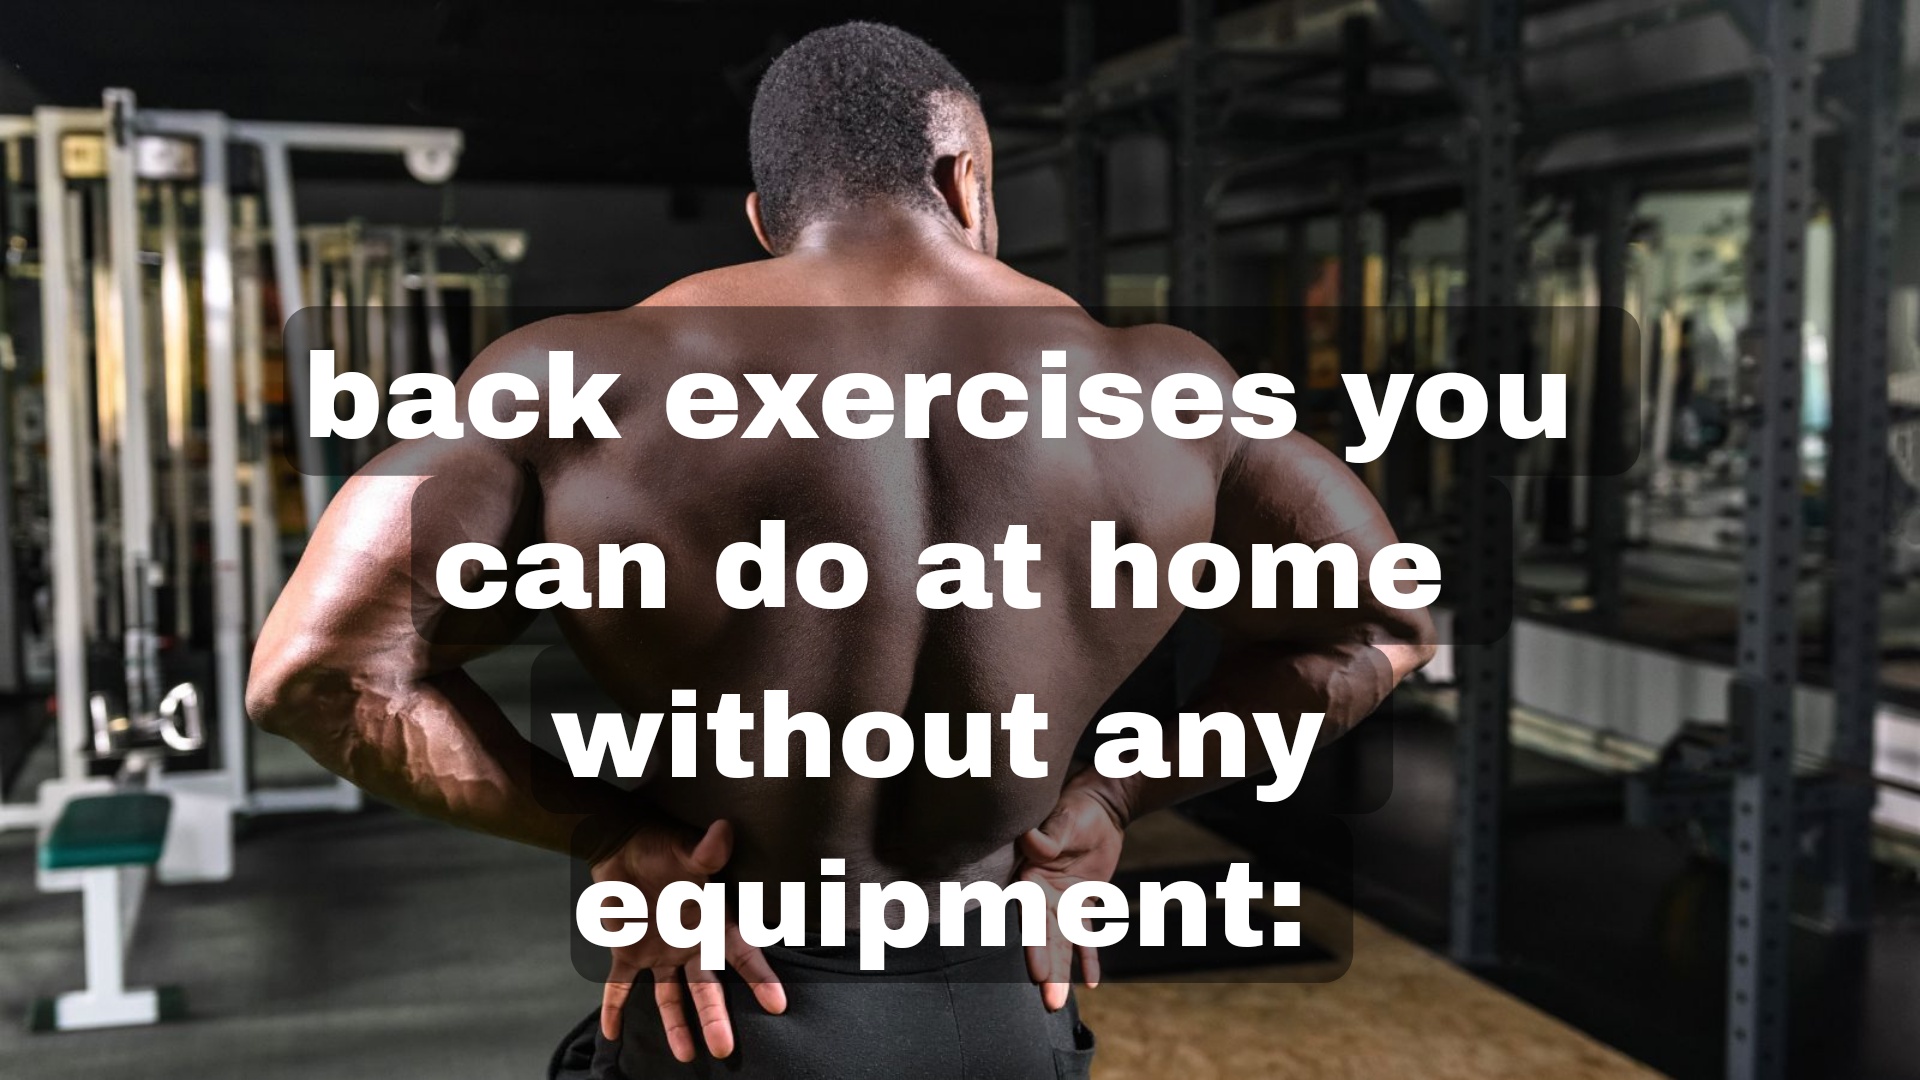 back exercises you can do at home without any equipment: